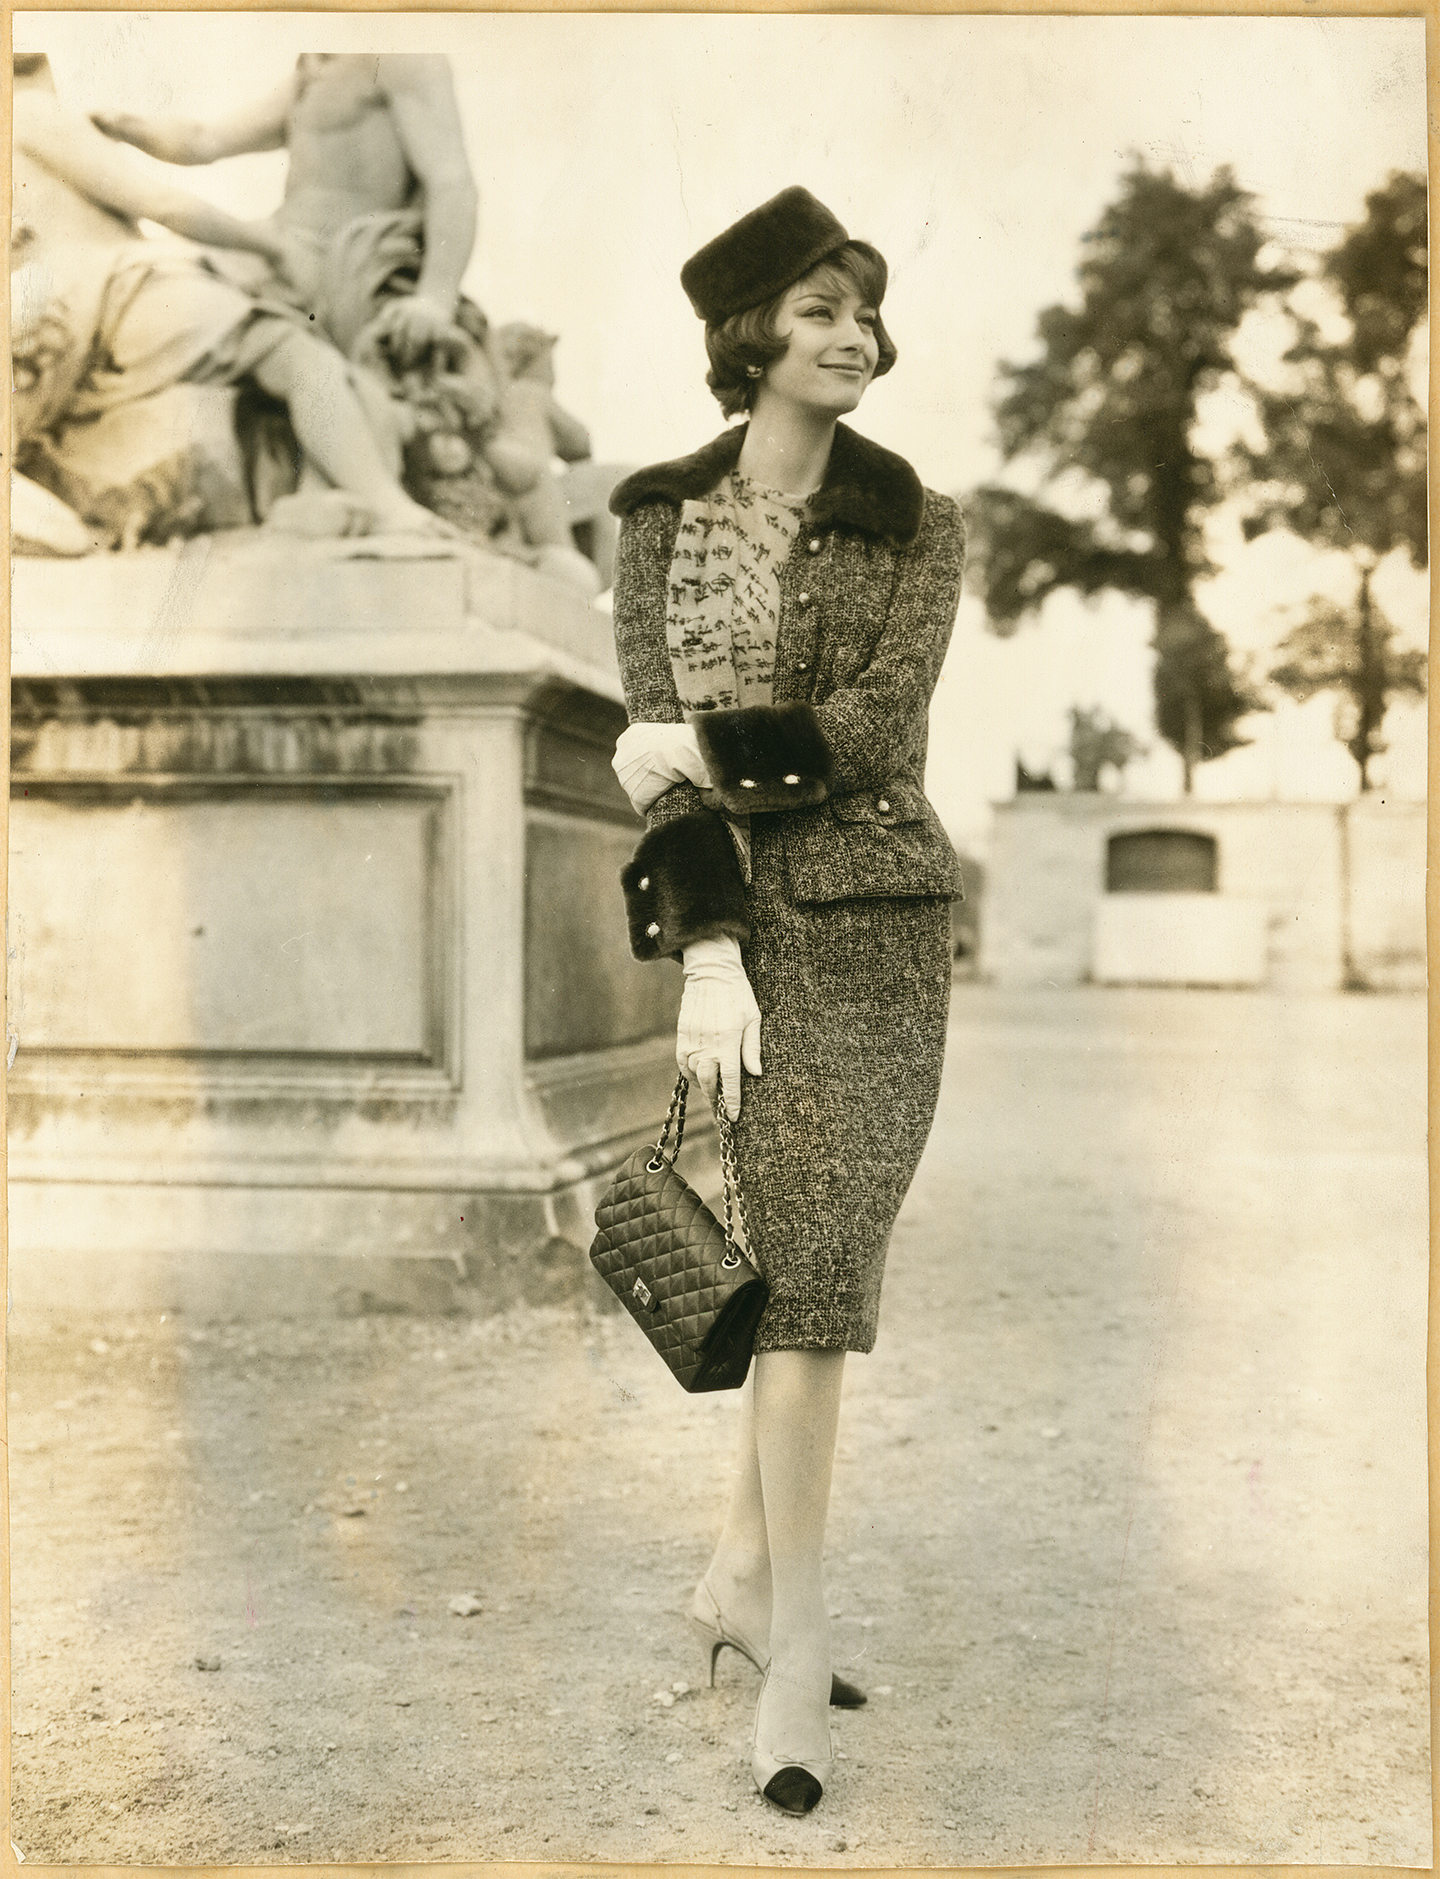 Marie-Hélène Arnaud in a tweed suit from Chanel’s Fall-Winter 1959 collection and Chanel shoes, carrying the 2.55 Chanel handbag © CHANEL / All Rights Reserved. Courtesy of Victoria and Albert Museum, London